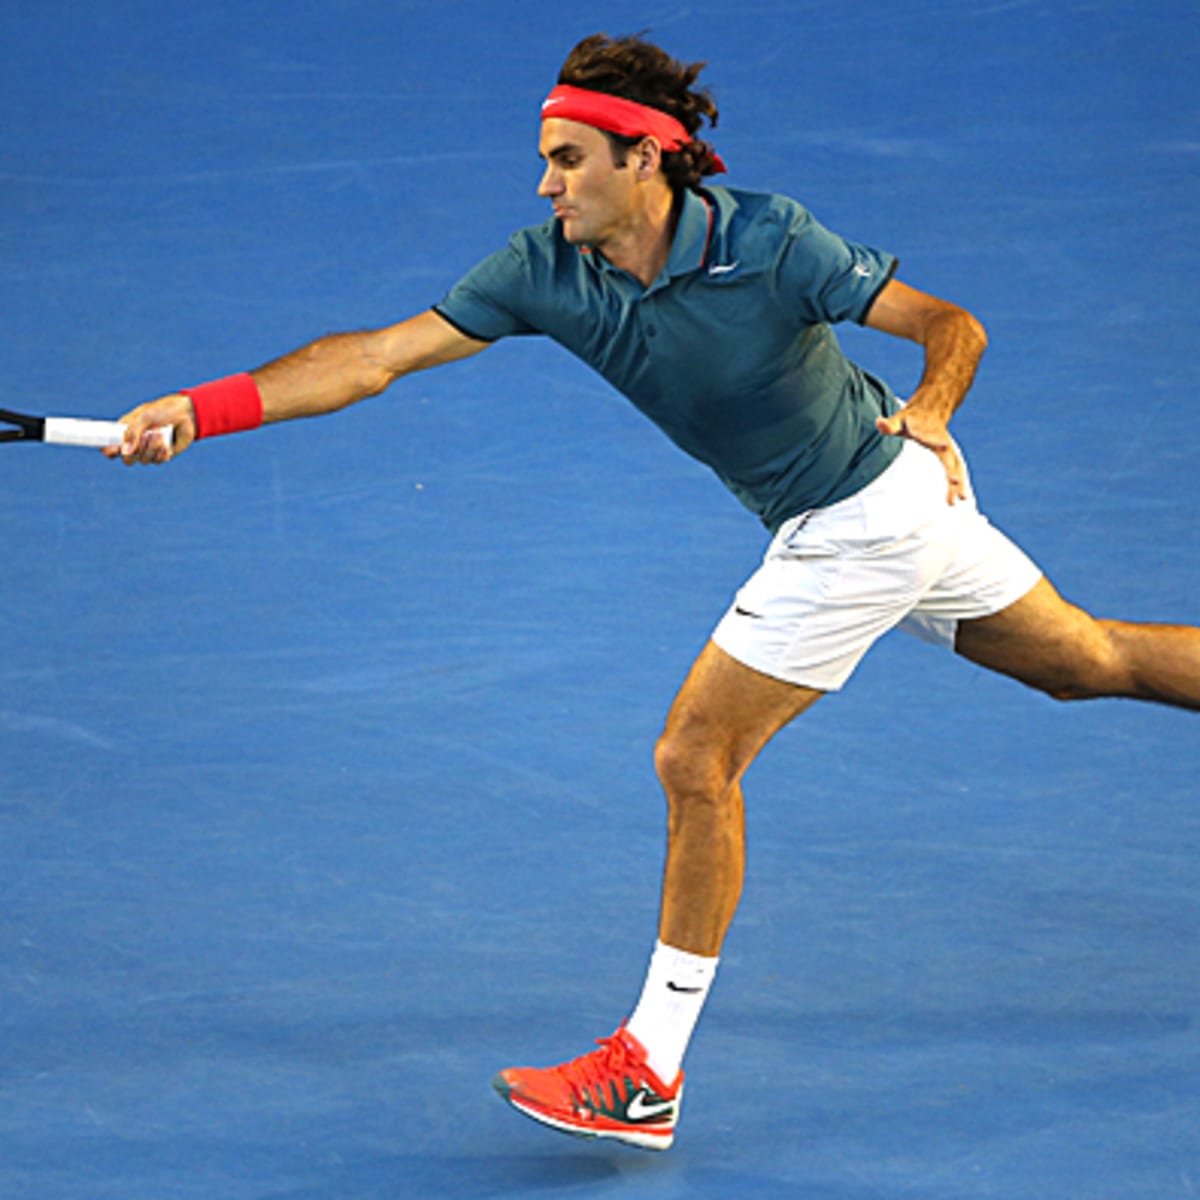 Roger Federer defeats Andy Murray to advance to Australian Open semifinals - Sports